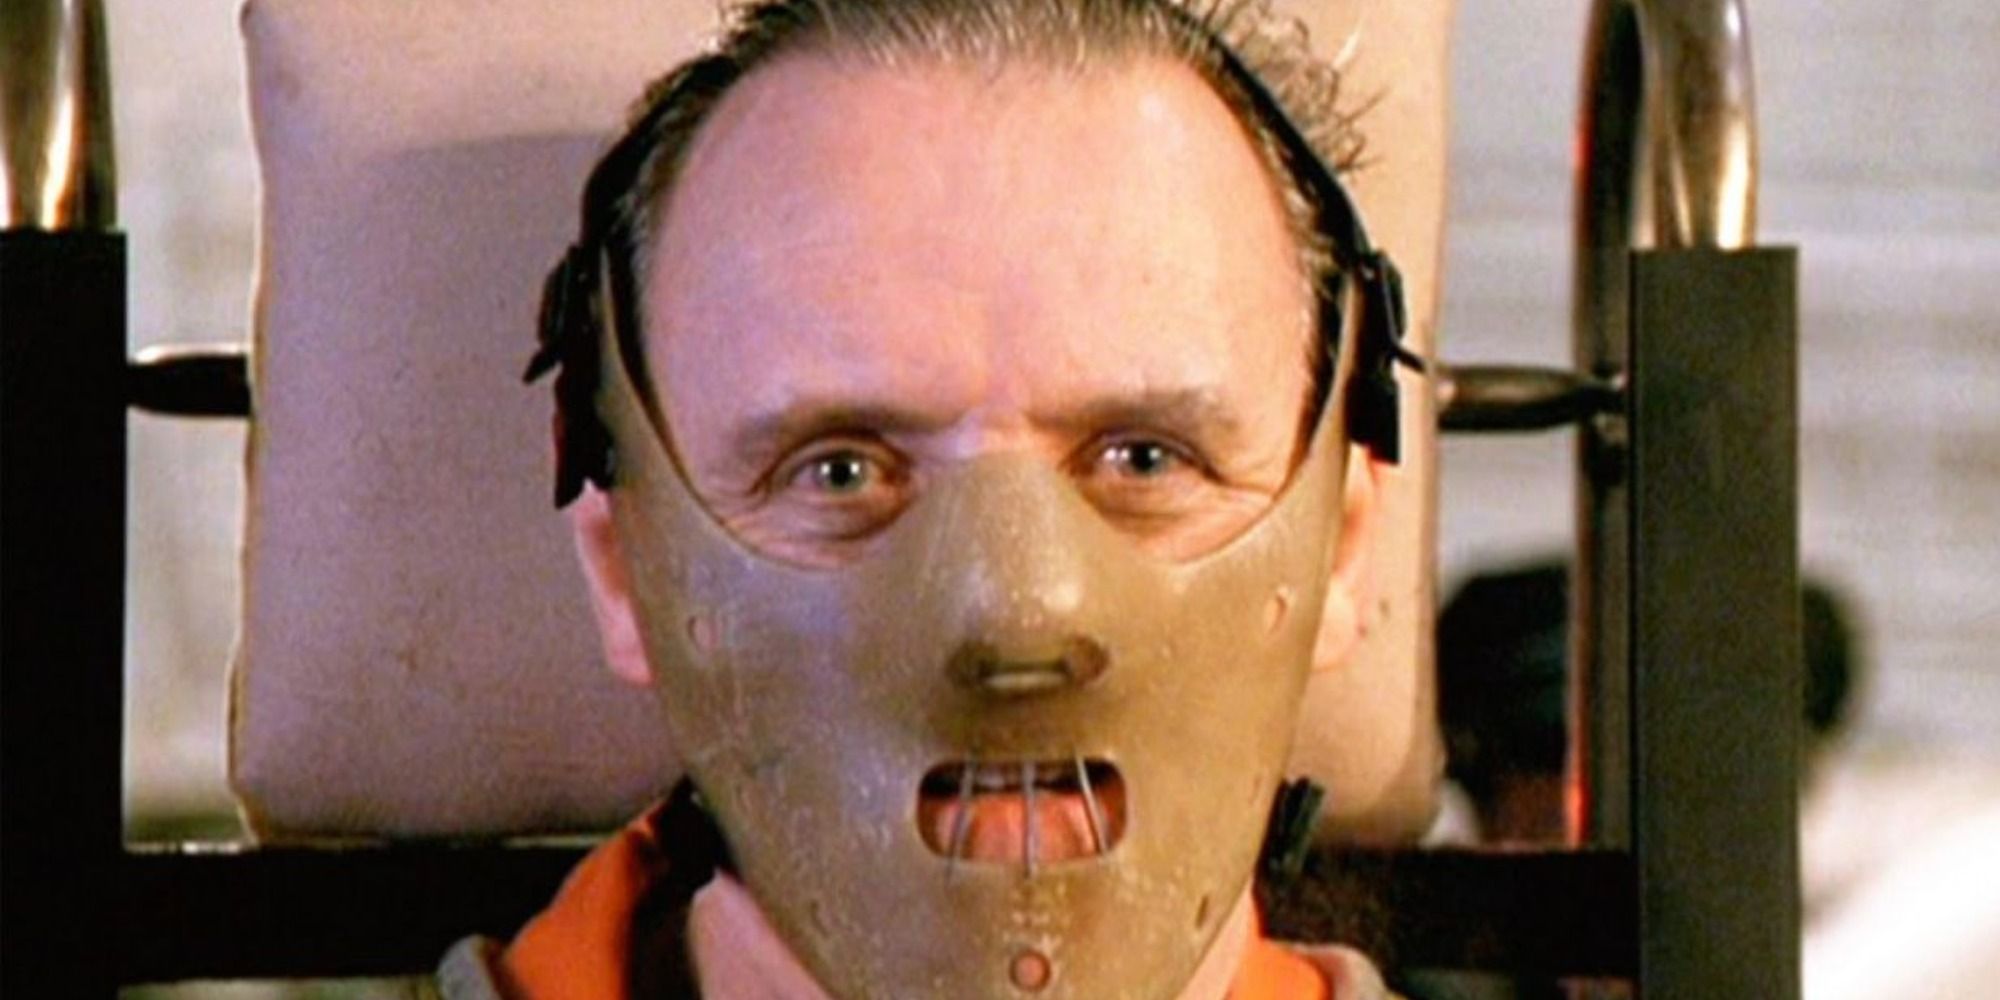 Hannibal Lecter in his muzzle mask in The Silence of the Lambs